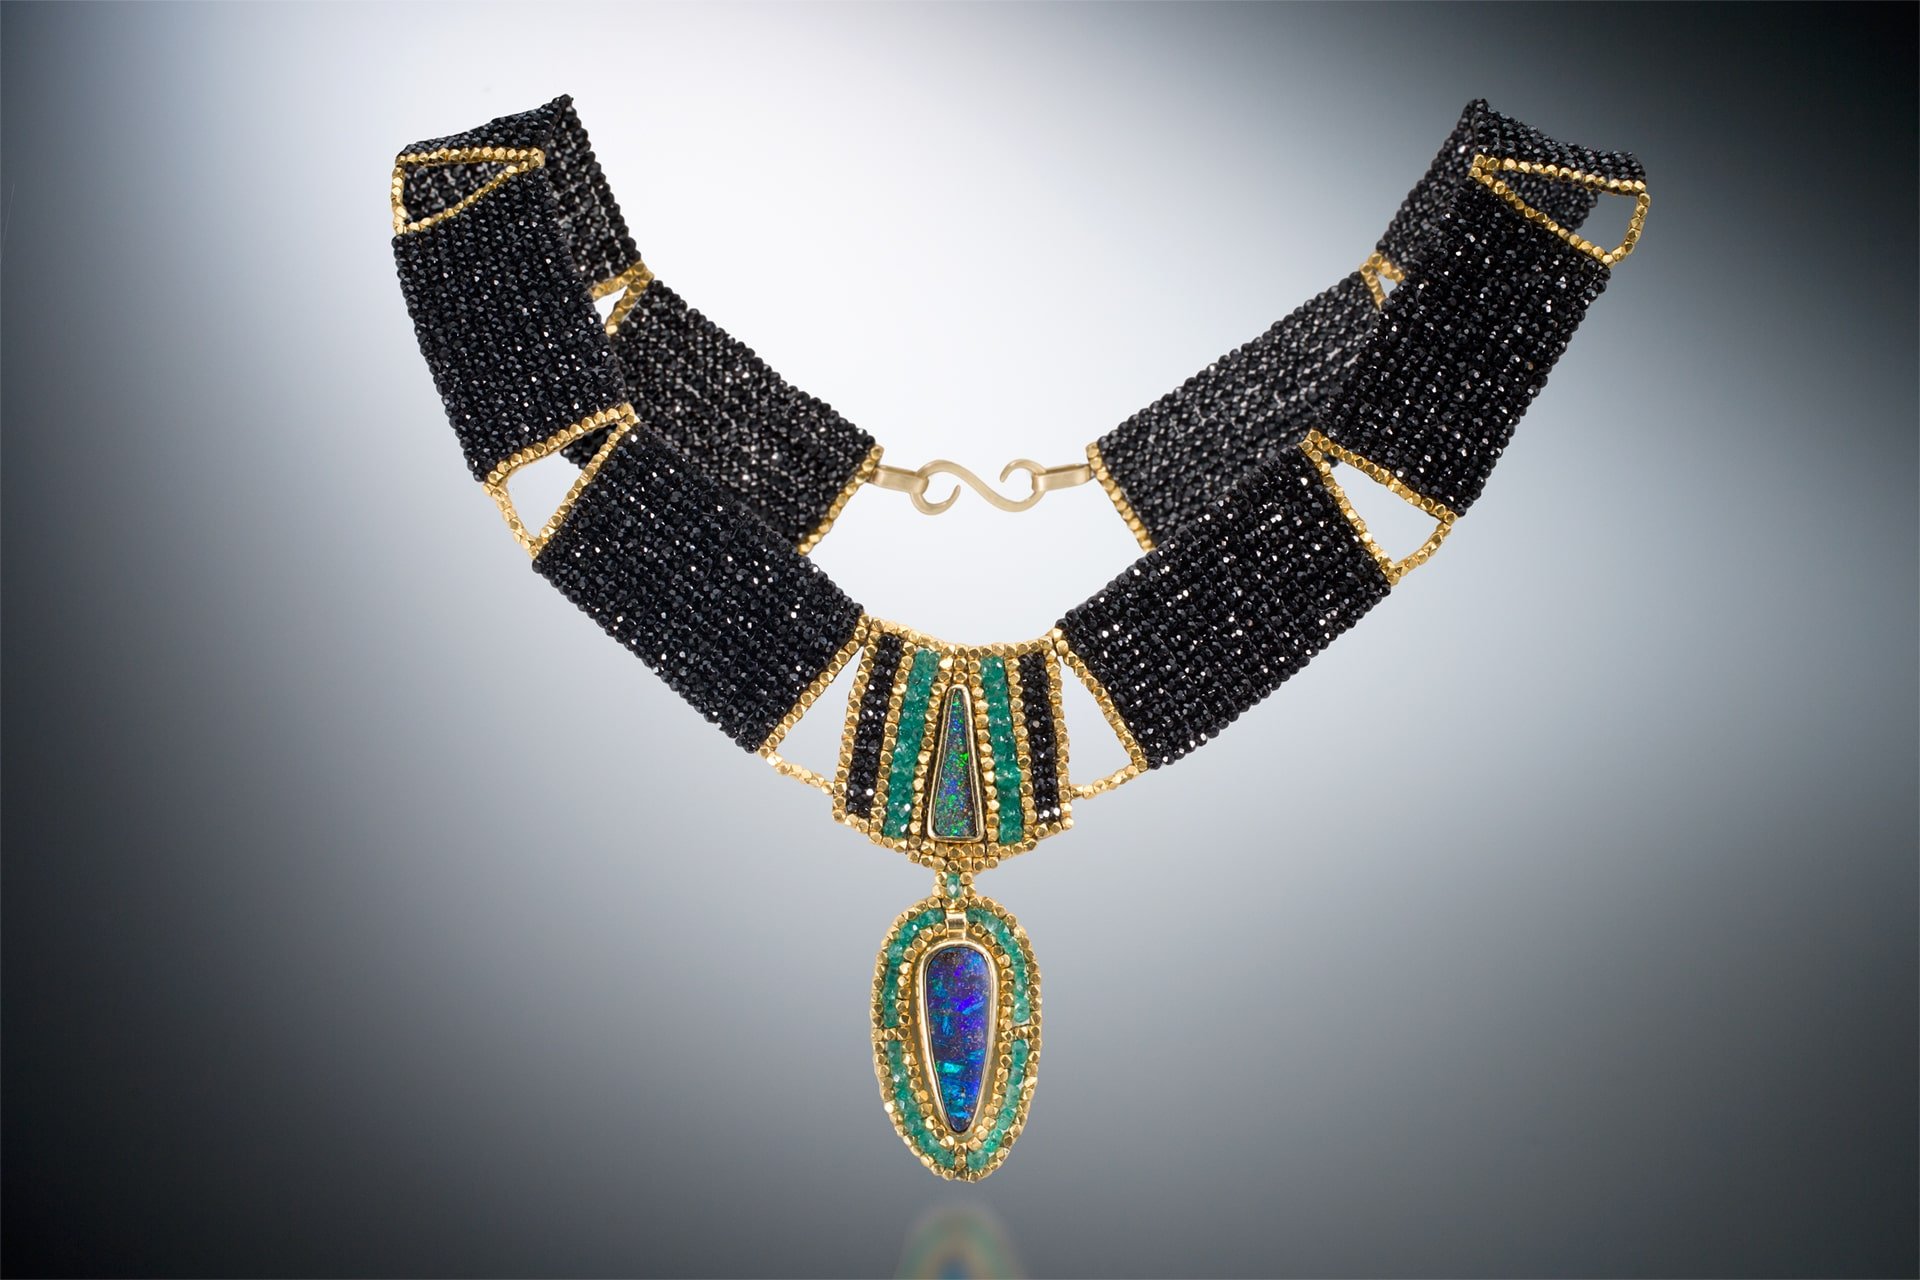 The Cleo Collar.  Hand woven out of black spinel, emerald, and 18k gold beads; hand fabricated bezels and clasp of 18k gold, and two Australian Boulder opals.